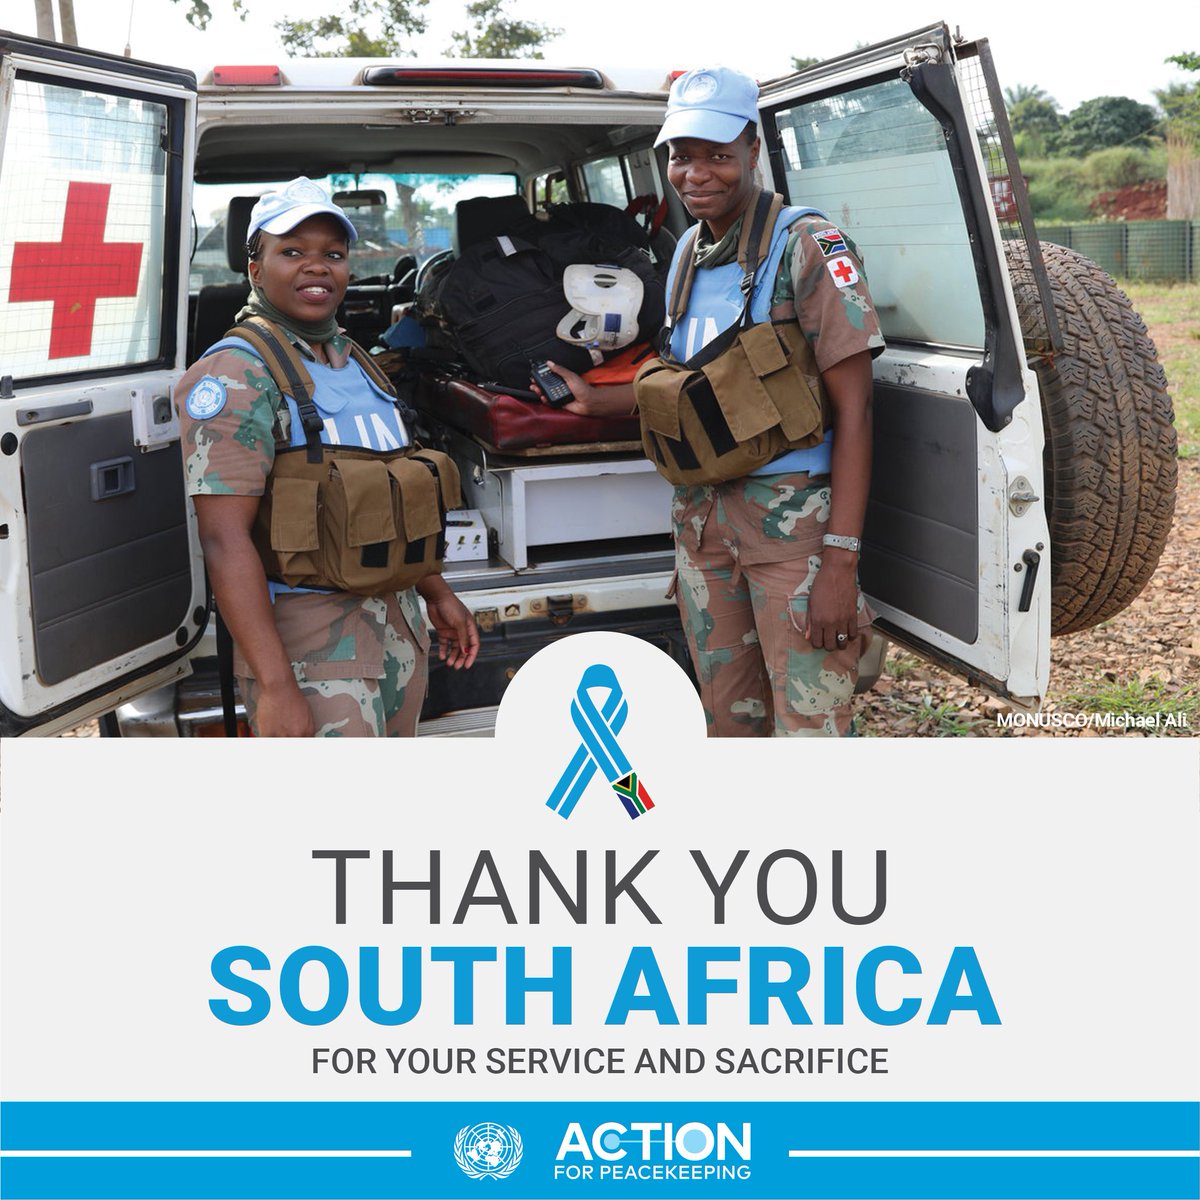 Thank you #SouthAfrica🇿🇦  peacekeepers.

To people living under the shadow of conflict, our teams of Blue Helmets represent hope. As #UNPeacekeepers support humanity, let us always support and recognize them.

#UNPeacekeepingDay
#PeaceBegins
@SANDF_ZA @DIRCO_ZA @PresidencyZA